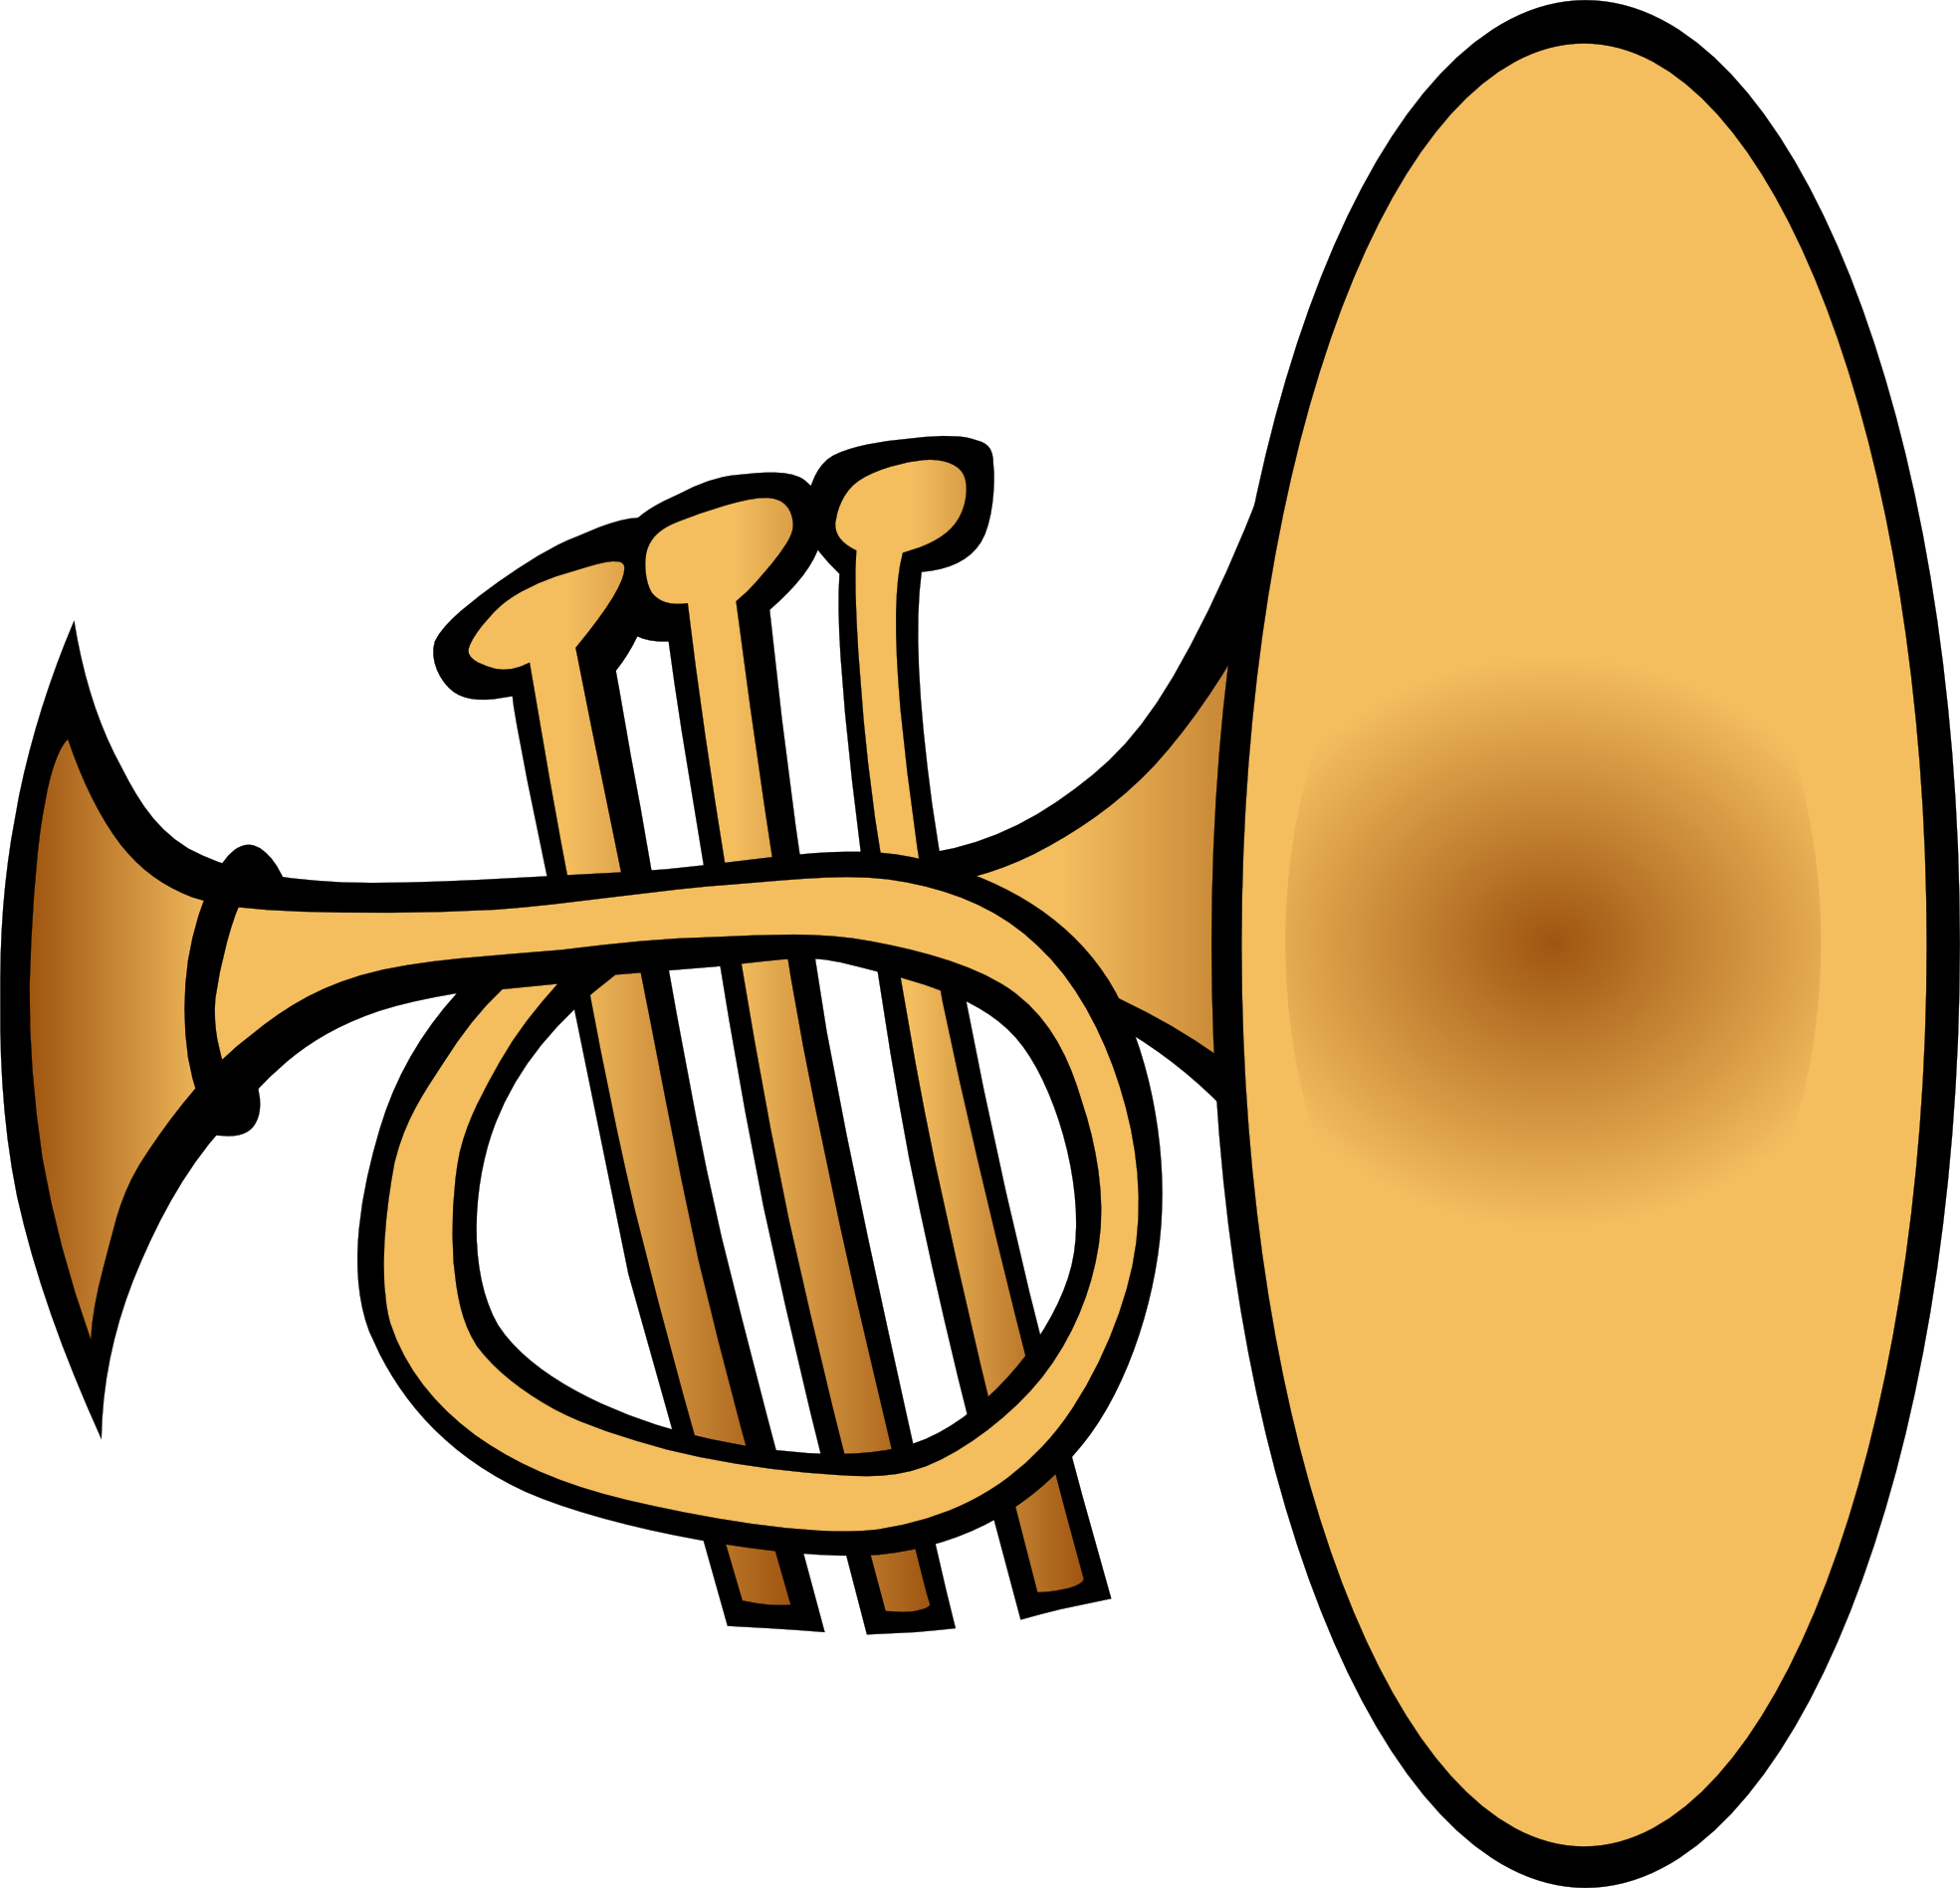 Trumpet clipart free clipart images